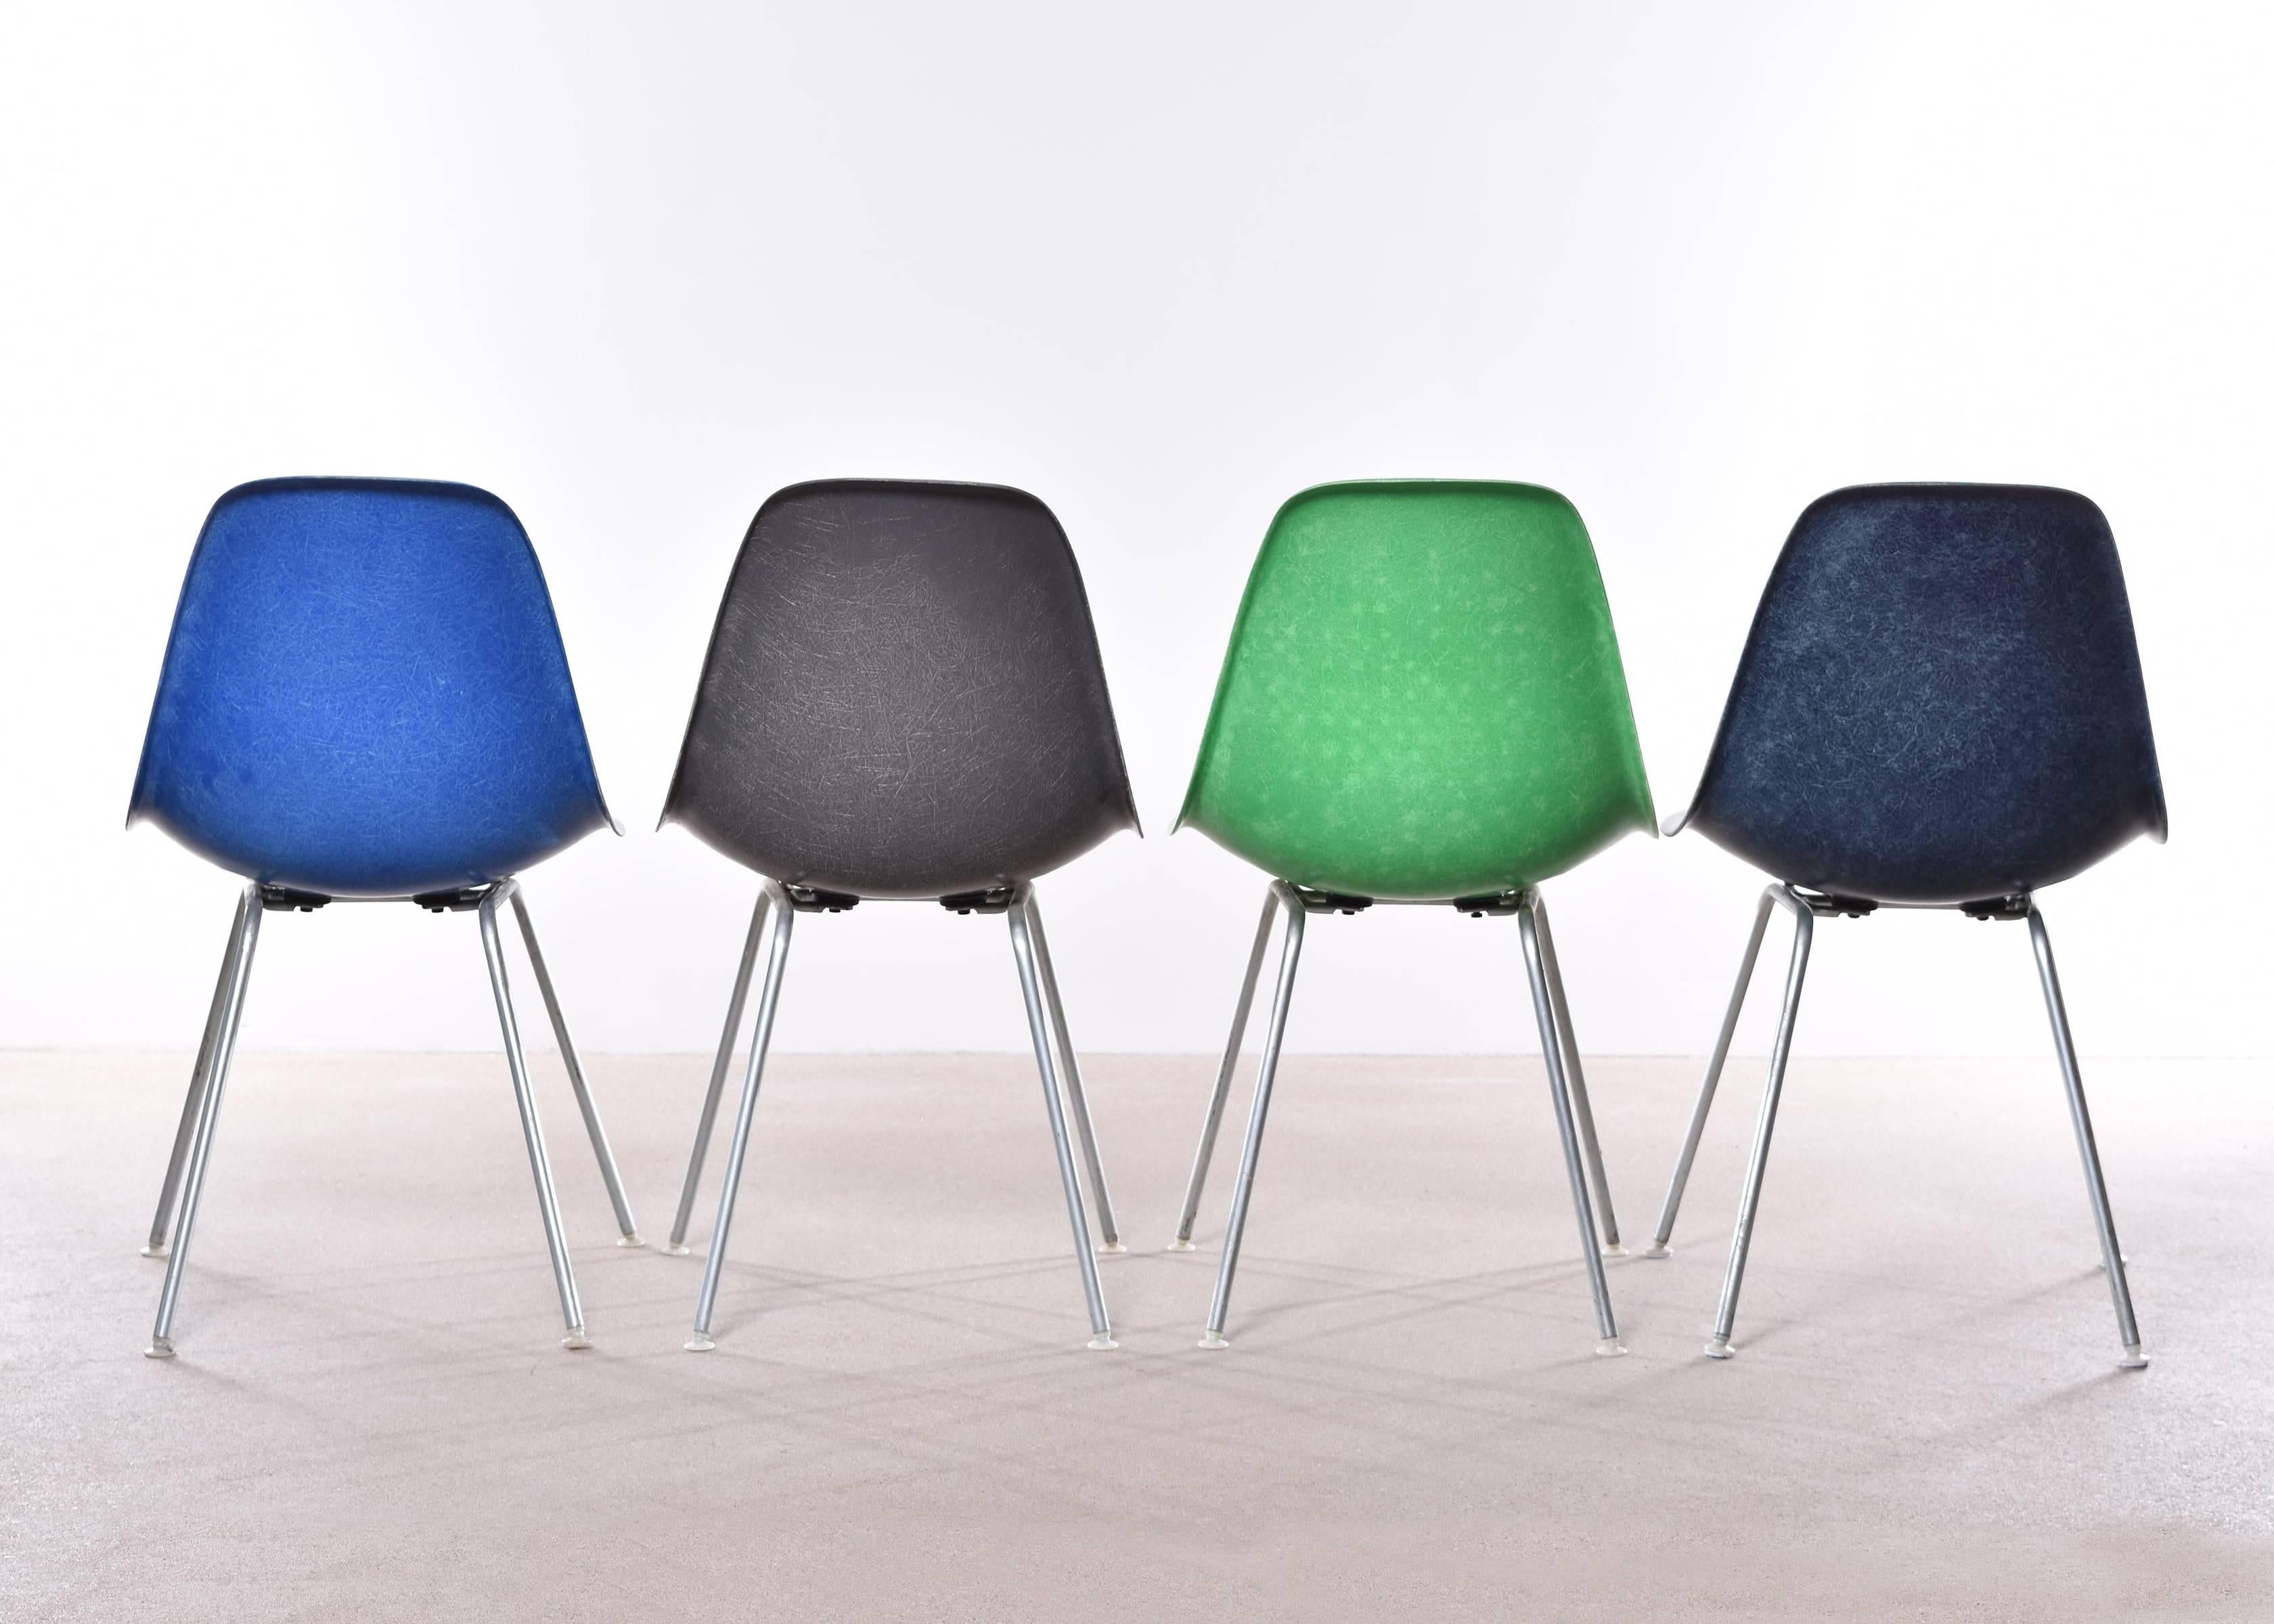 Beautiful iconic DSX chairs in the colors: Ultramarine blue, elephant hide grey, Kelly green and navy blue. Shells are in very good or excellent condition with only slight traces of use. Replaced shock mounts which guarantee save usability for the